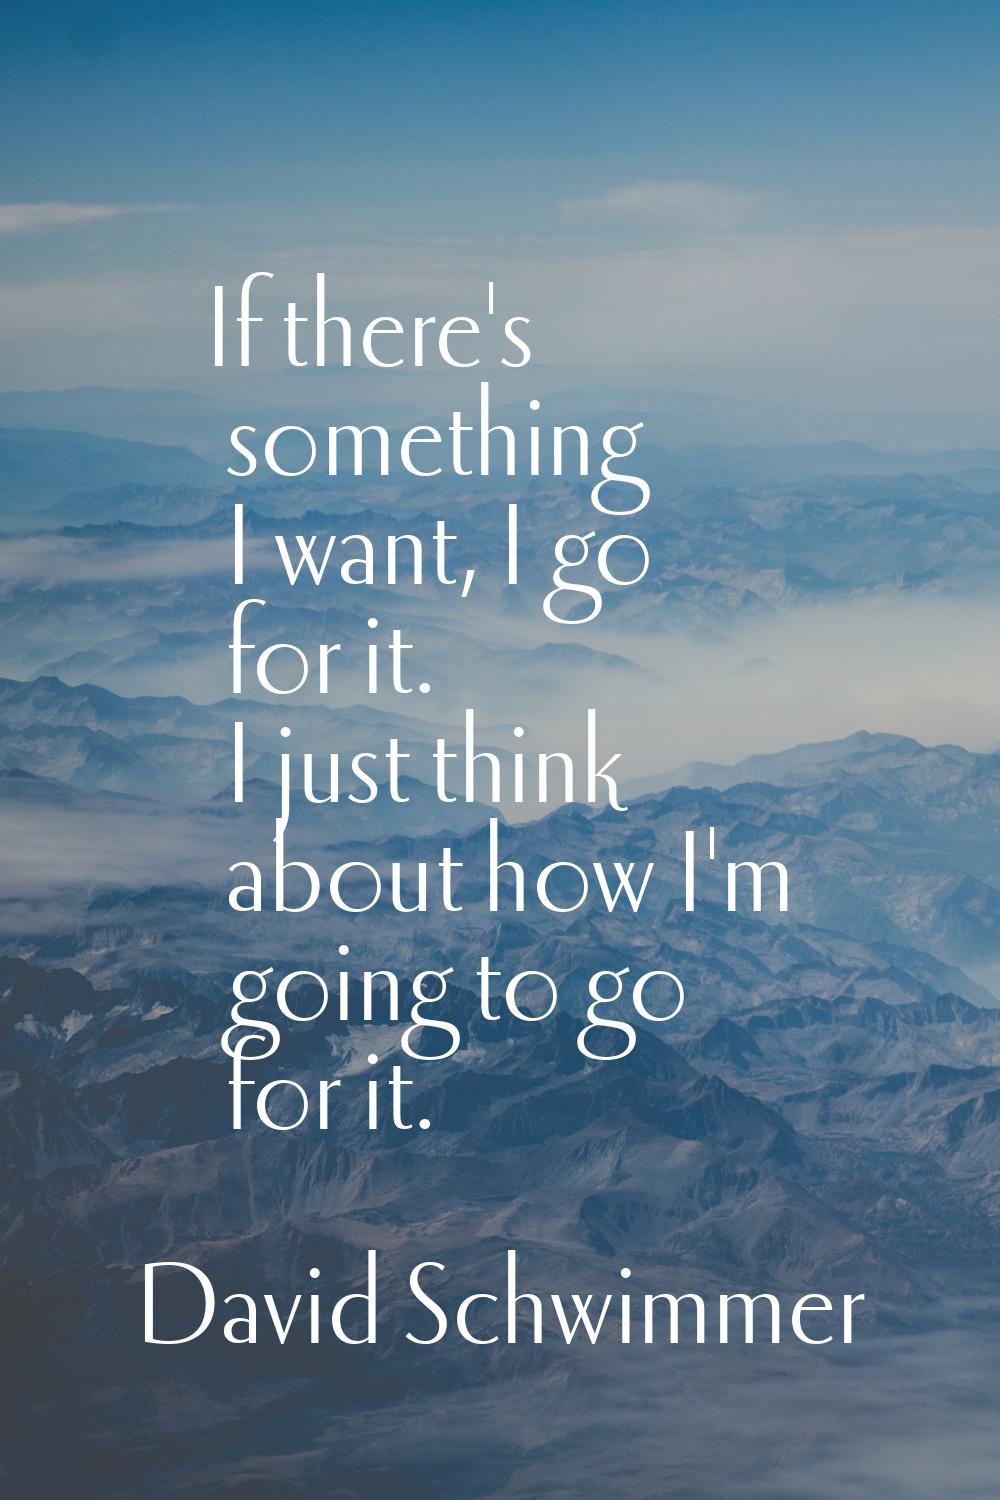 If there's something I want, I go for it. I just think about how I'm going to go for it.